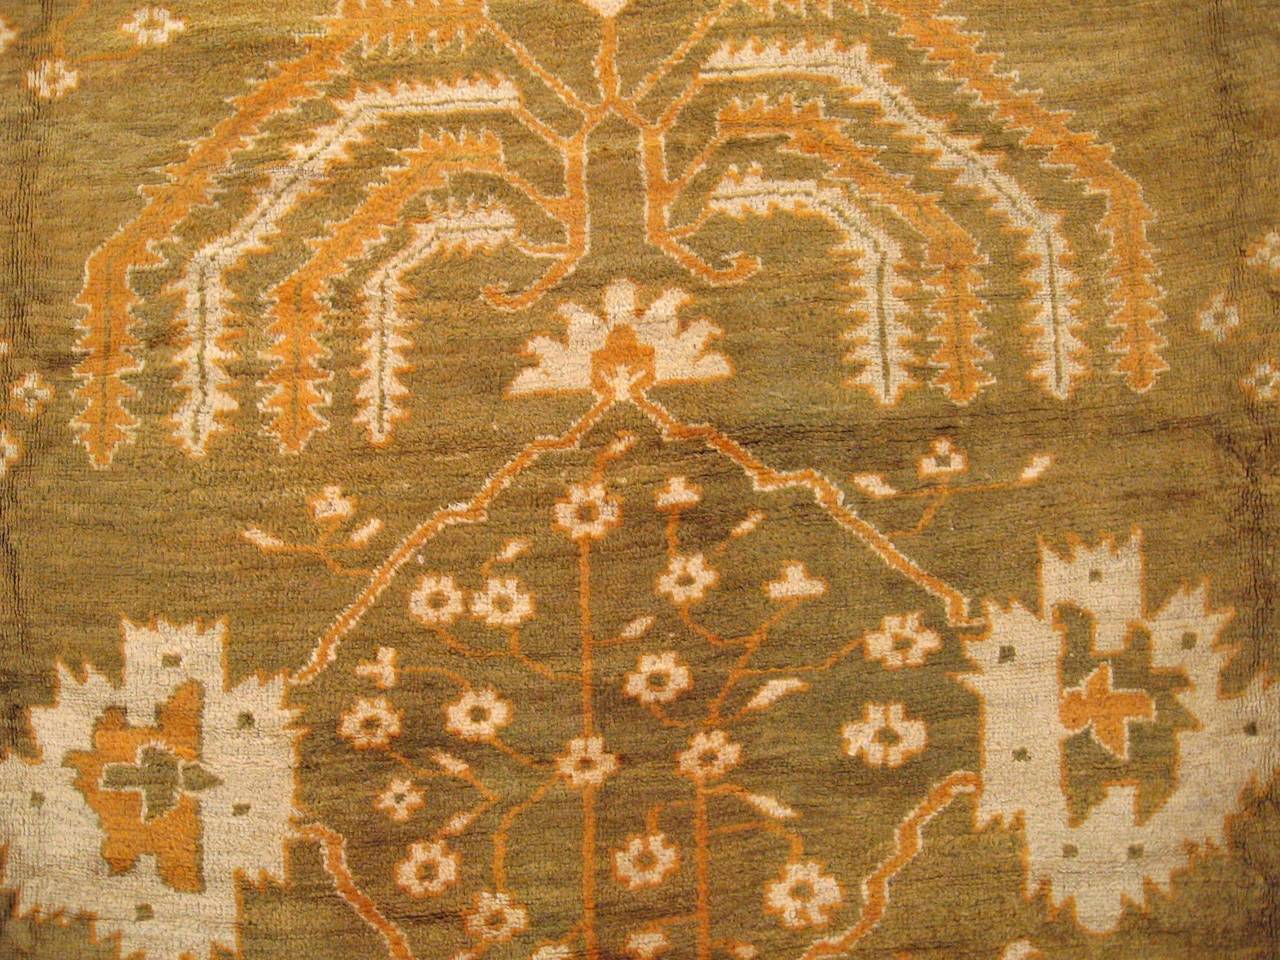 Antique Turkish Oushak Carpet with Cypress Trees, in Large Size, Green and Ivory In Good Condition For Sale In New York, NY